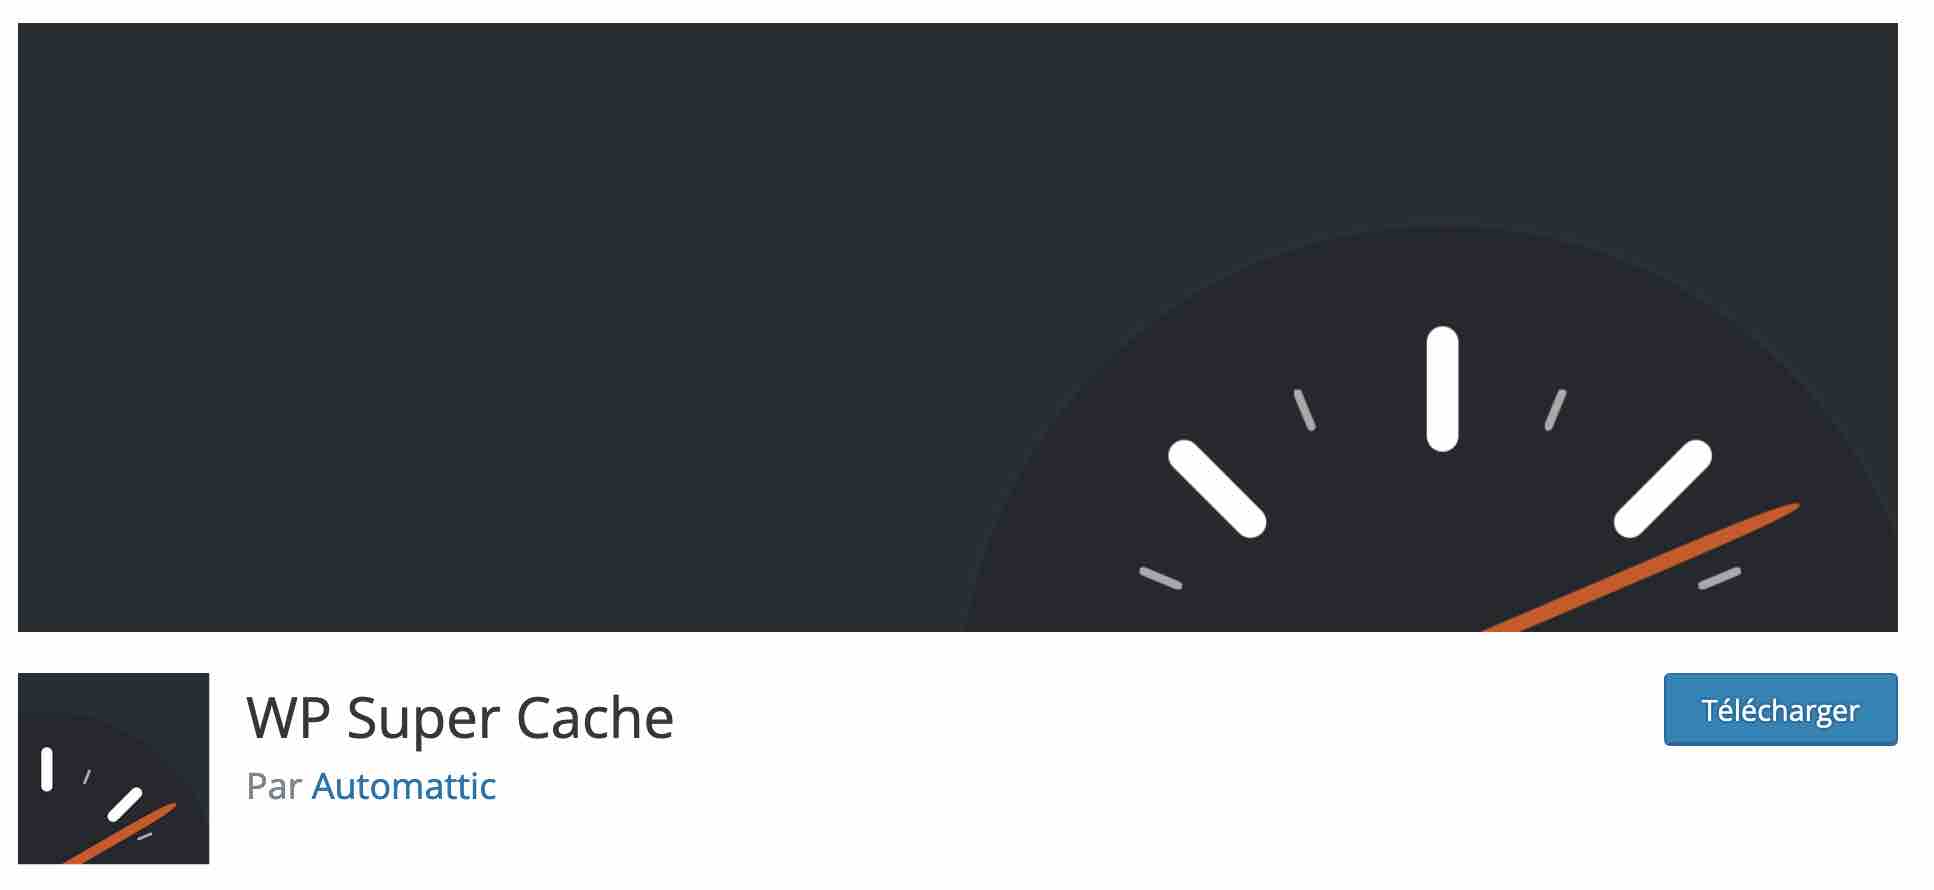 The WP Super Cache extension allows you to clear the cache of WordPress.